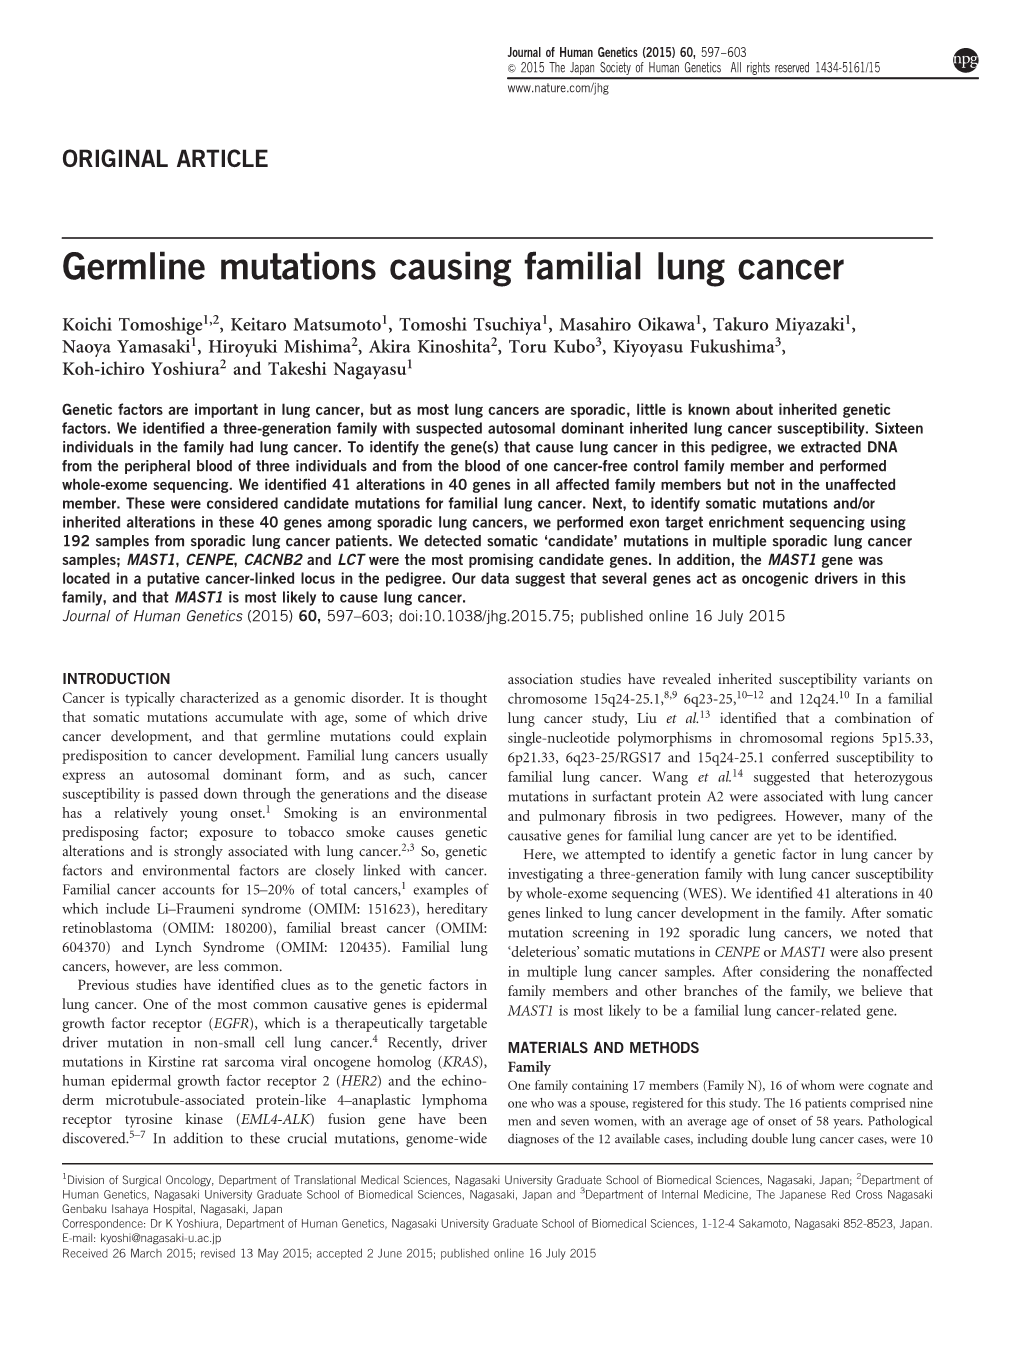 Germline Mutations Causing Familial Lung Cancer